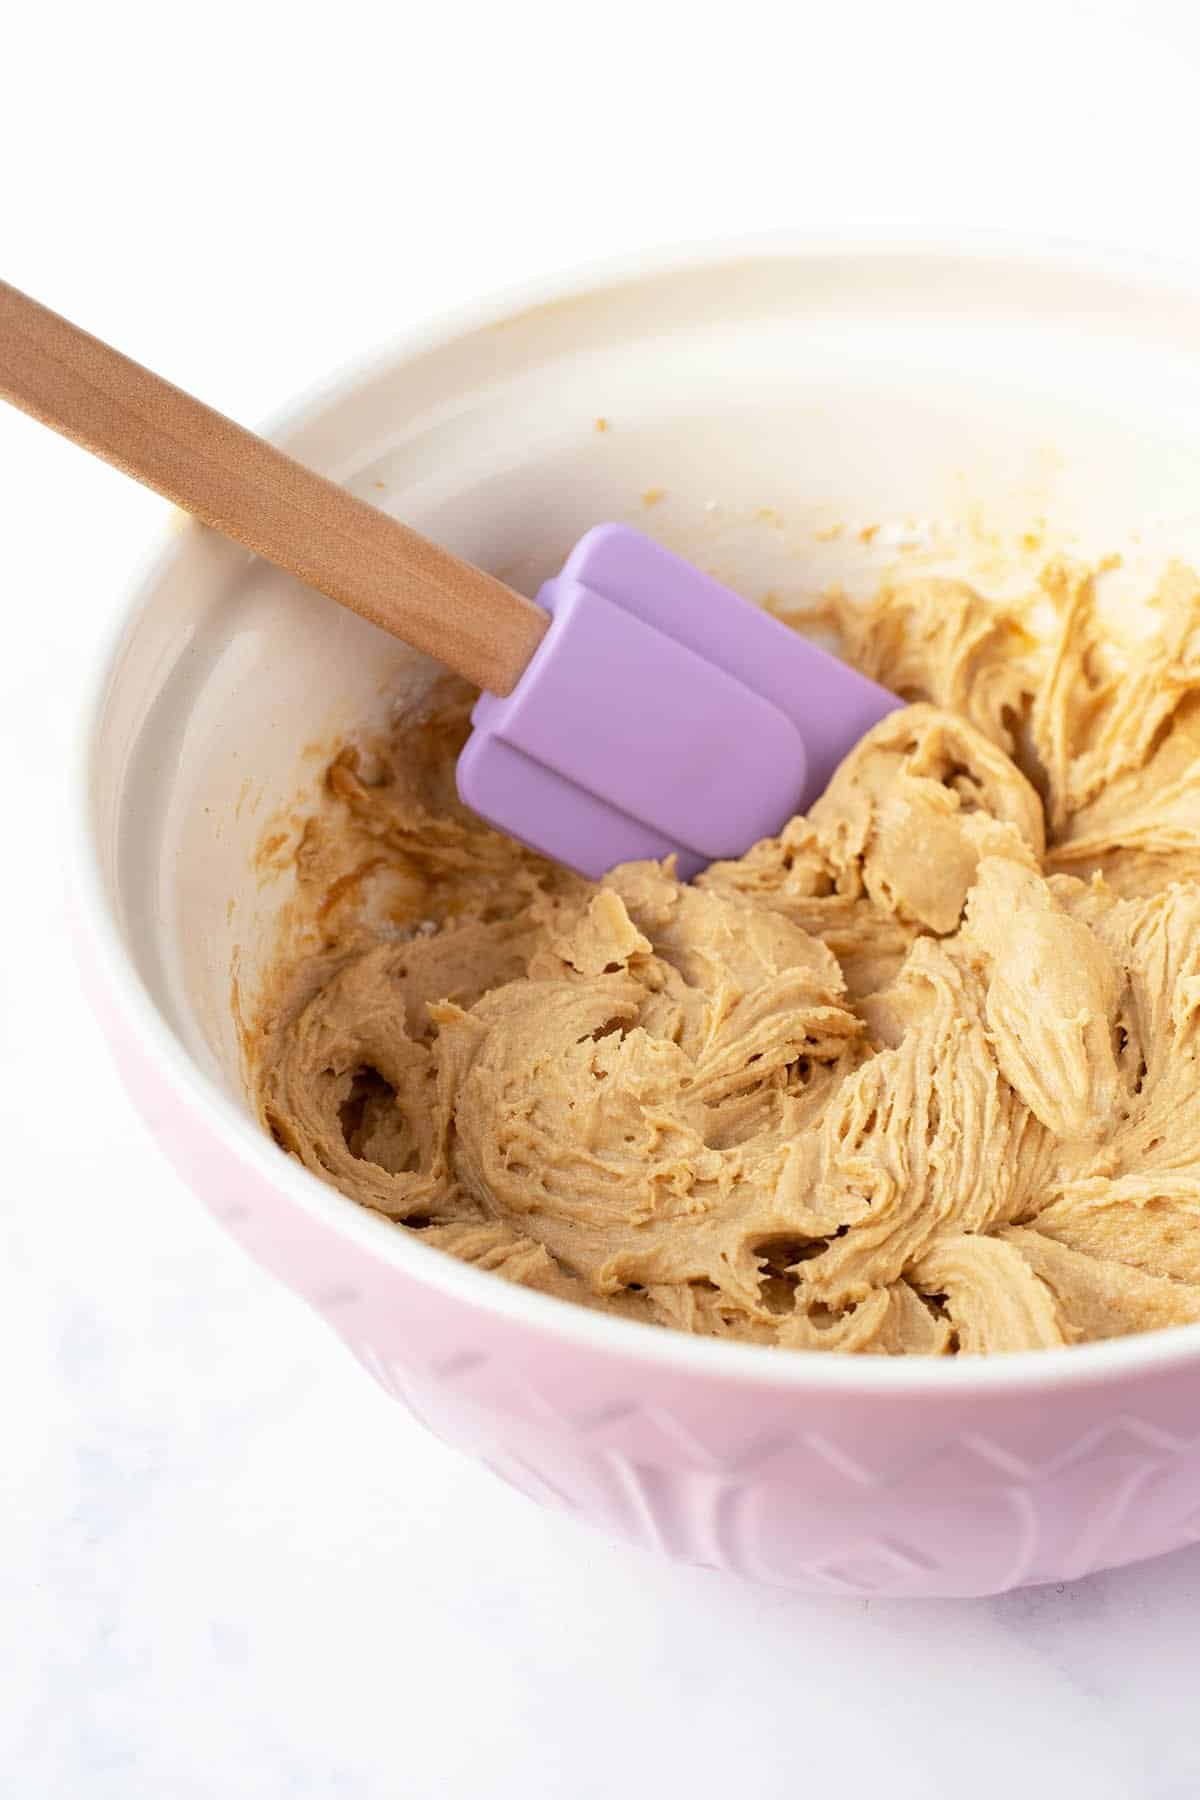 A pink mixing bowl filled with Biscoff cake batter.